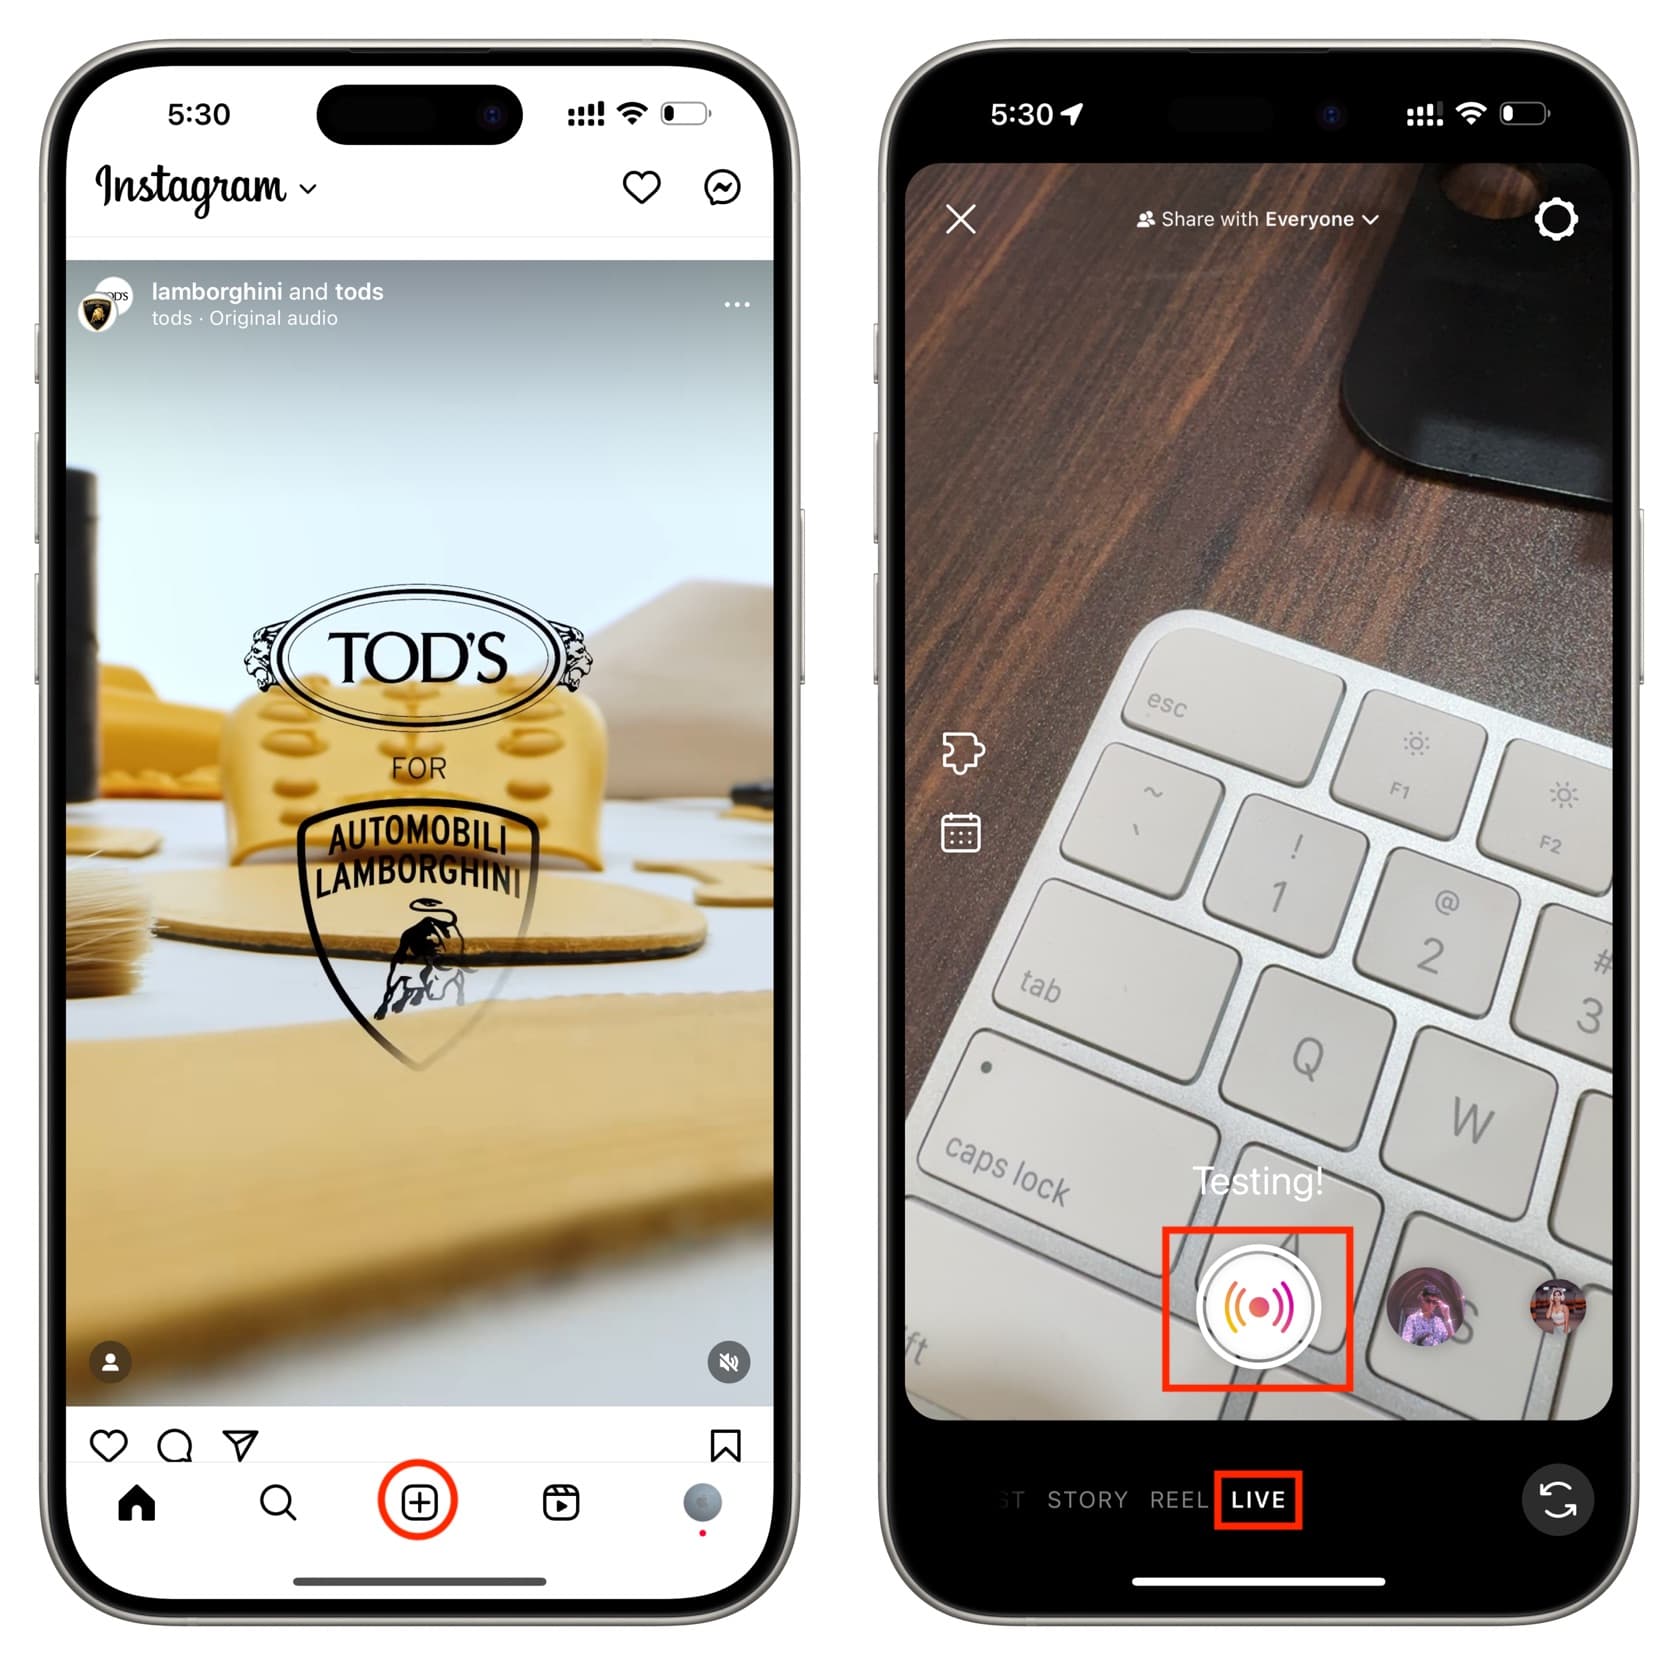 Get started for a Live video broadcast in Instagram on iPhone